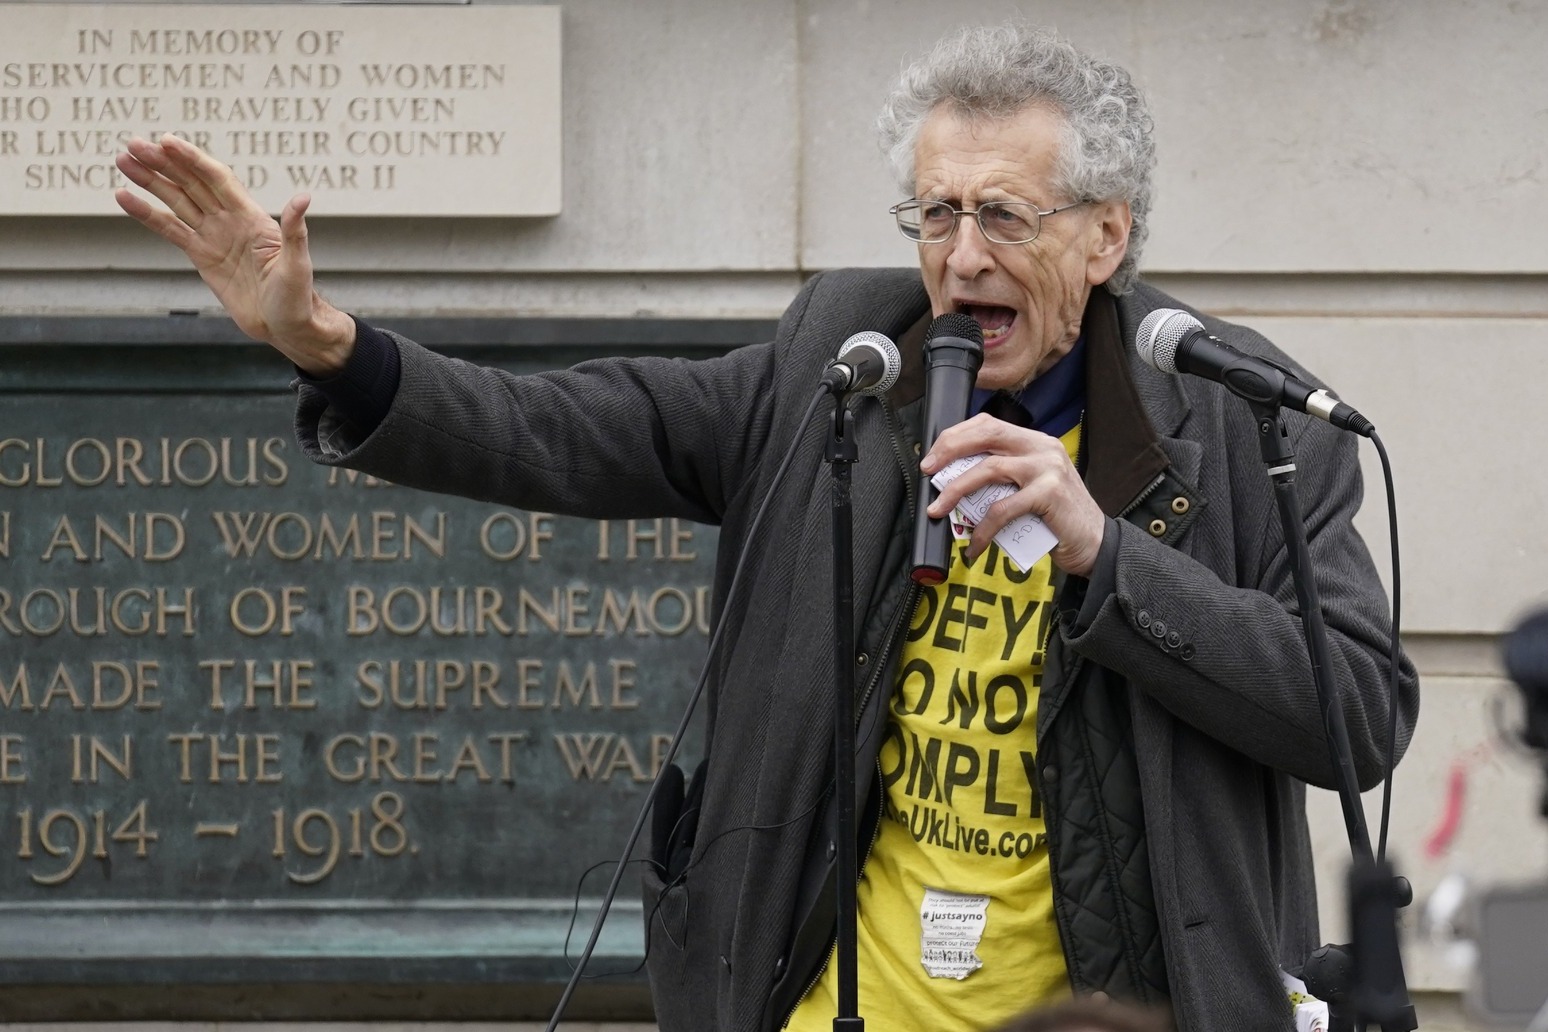 Piers Corbyn fined after accusing vaccination clinic staff of ‘murdering people’ 